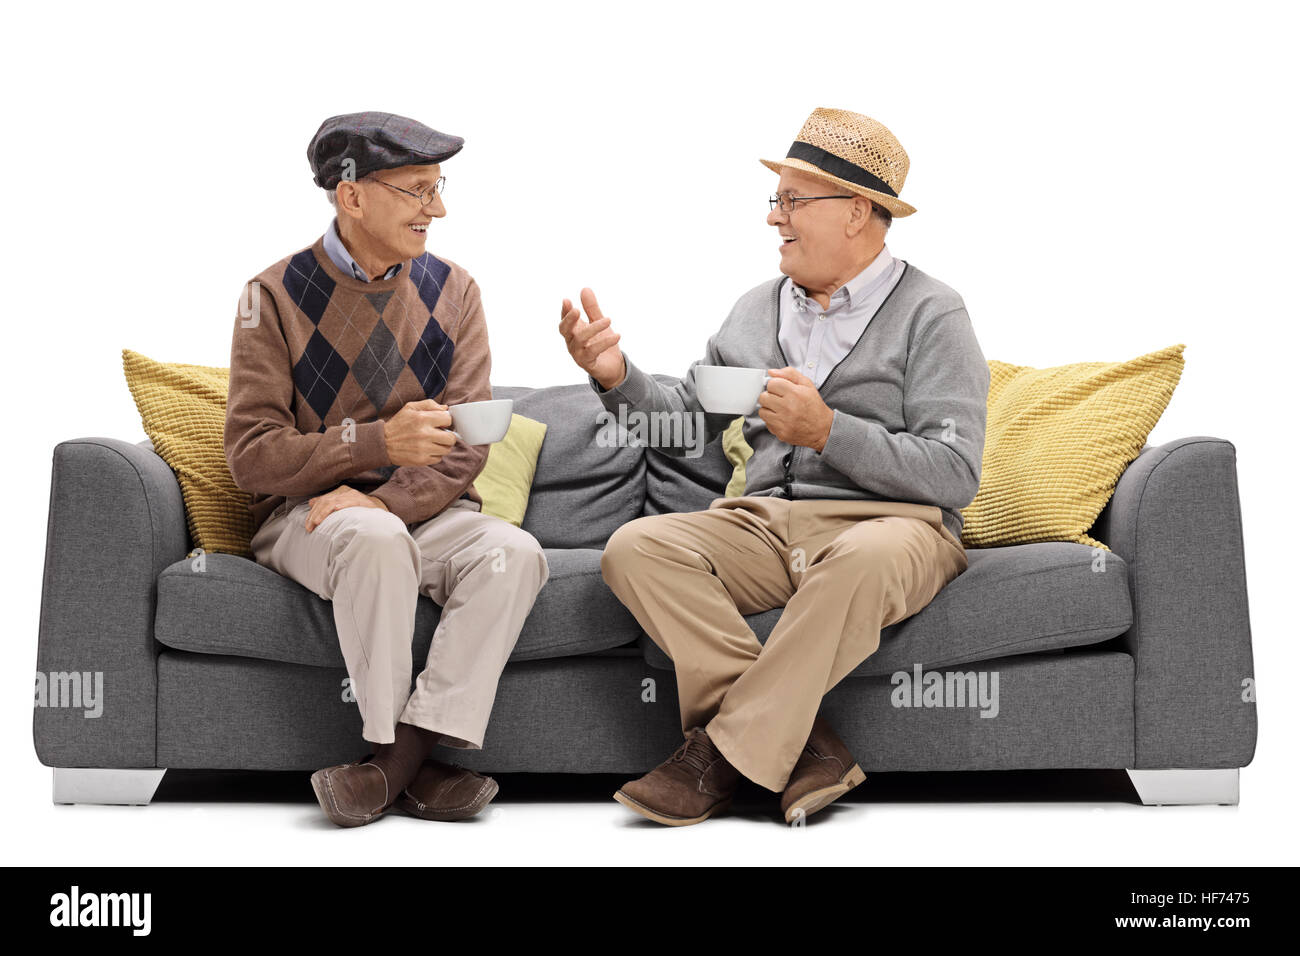 Two people talking sofa Cut Out Stock Images & Pictures - Alamy